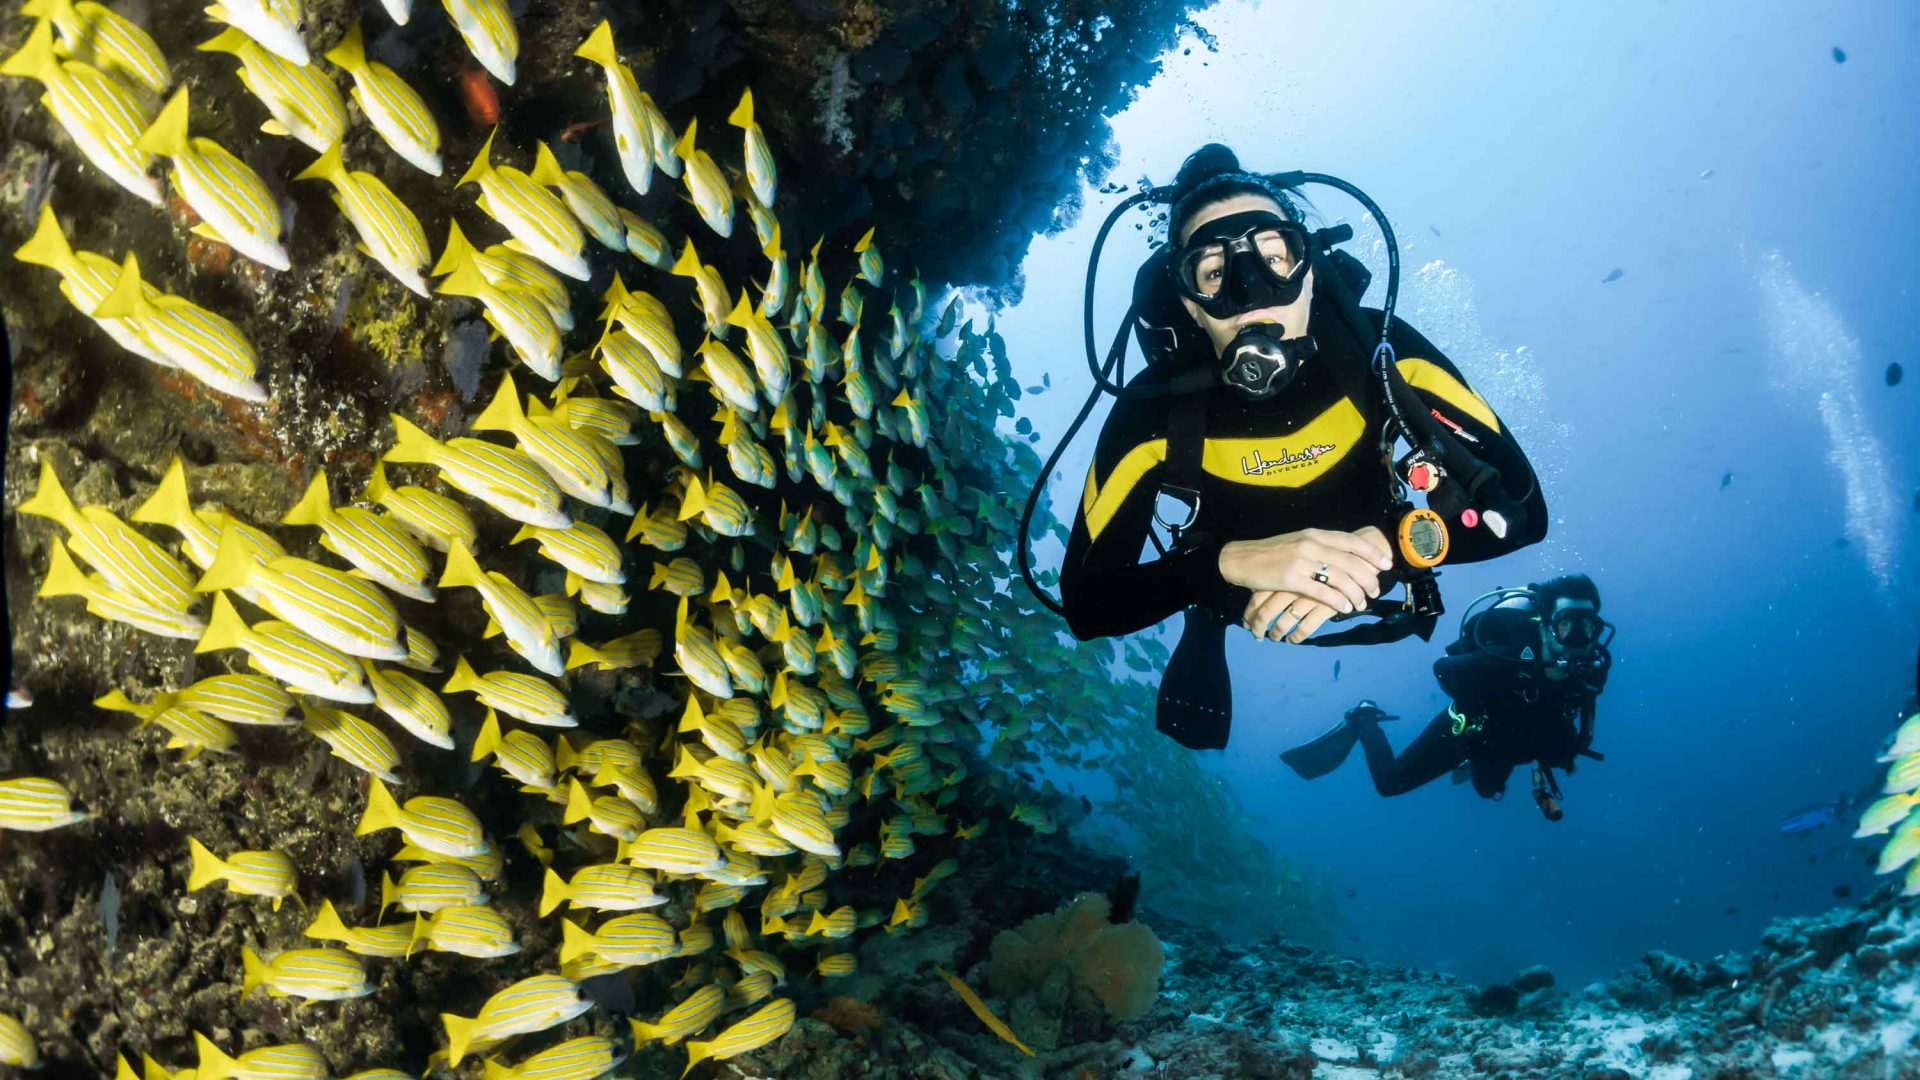 A diver swims past some fish at a reef.